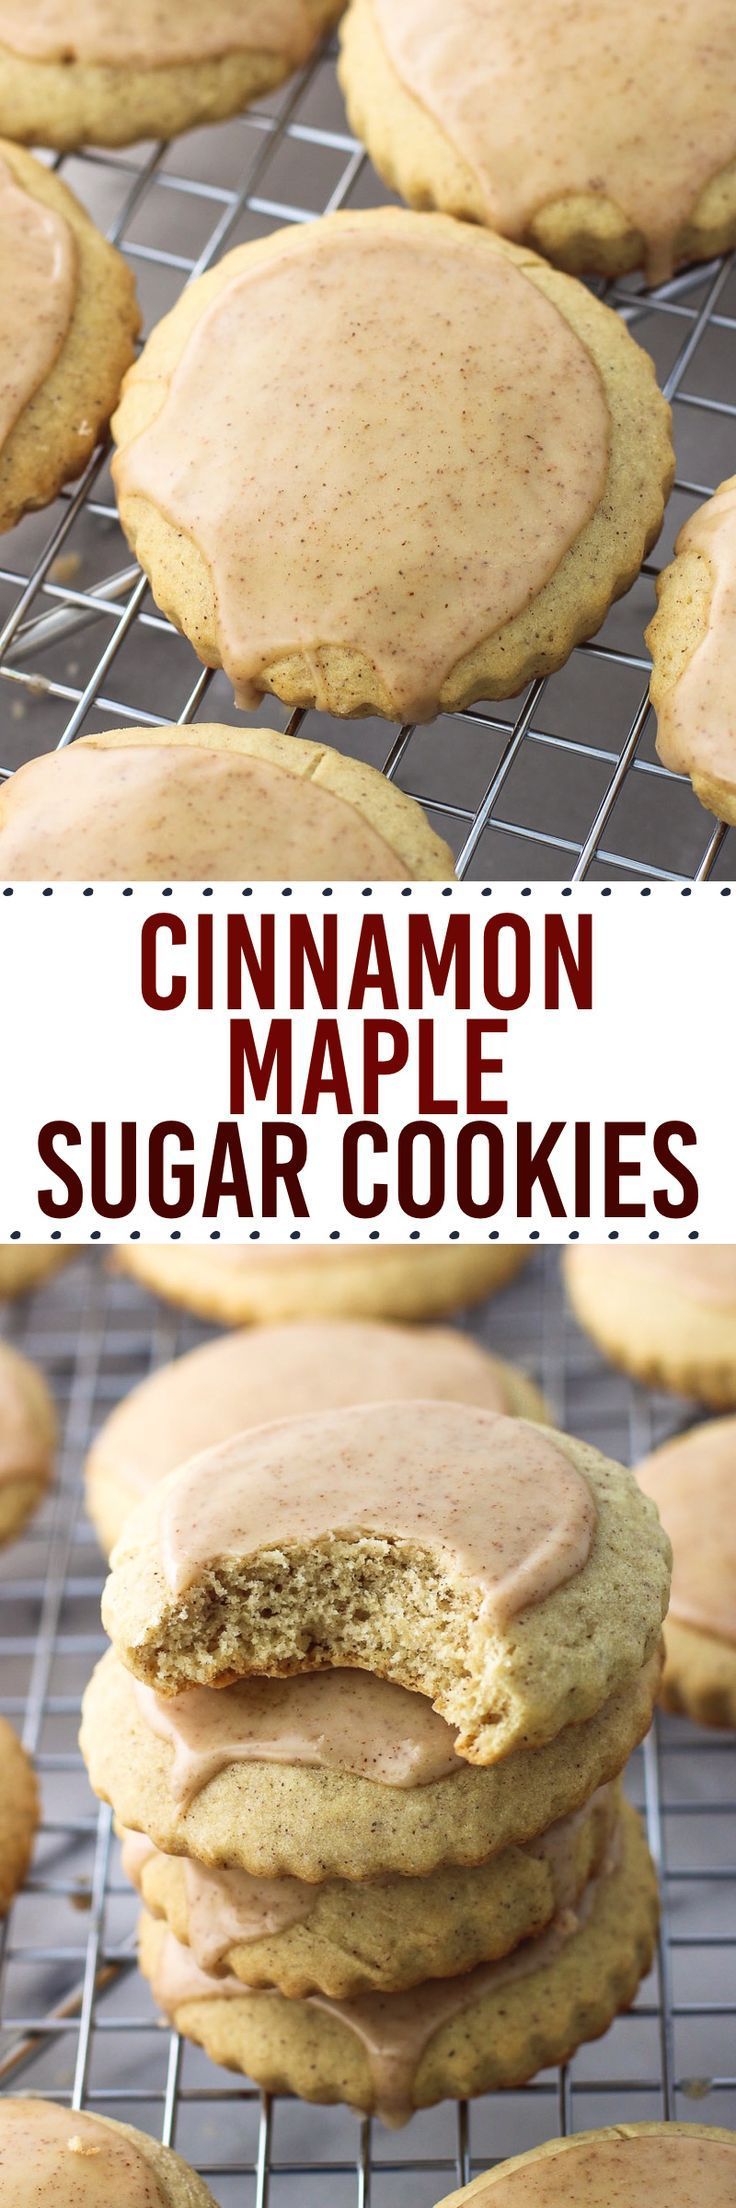 Cinnamon maple sugar cookies are tender and cinnamon-spiced, with a hint of maple